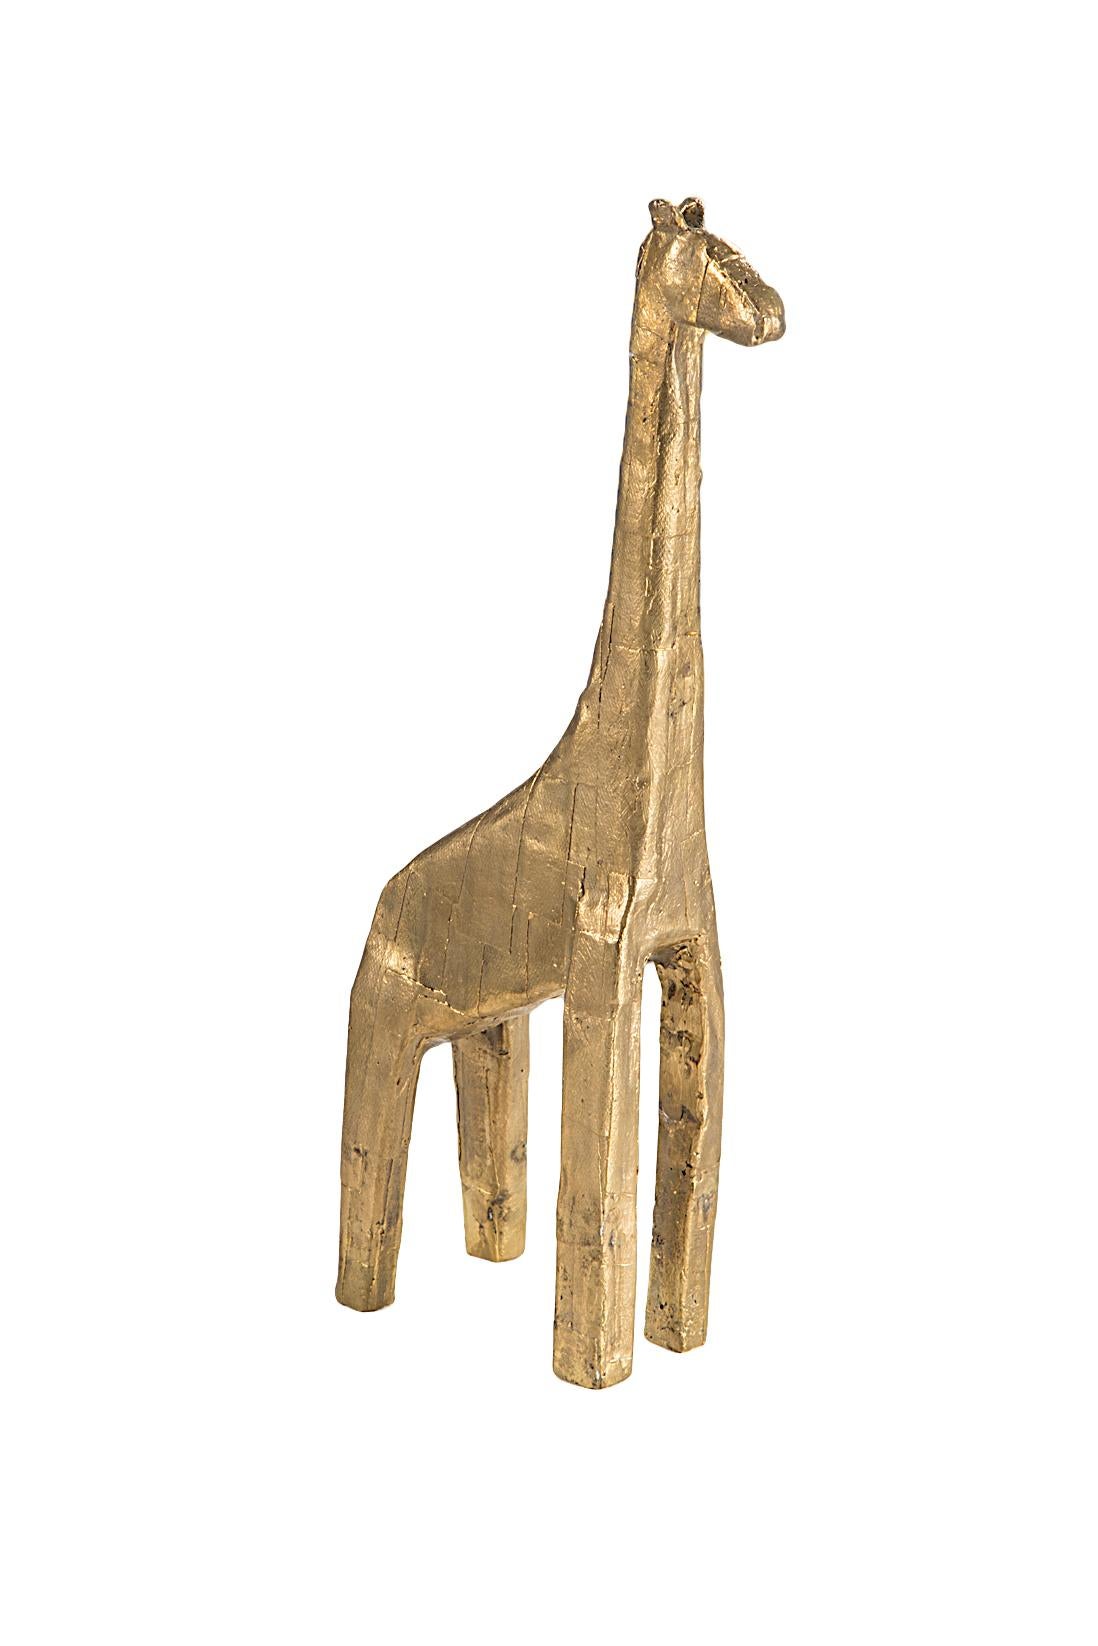 Giraffe sculpture by Pulpo
Dimensions: D12 x W6 x H28 cm
Materials: bronze

A Crash, a tower, a herd, a flock. However you name this group, they simply belong together. Stirred by explorations into nature and art, German designer Kai Linke has